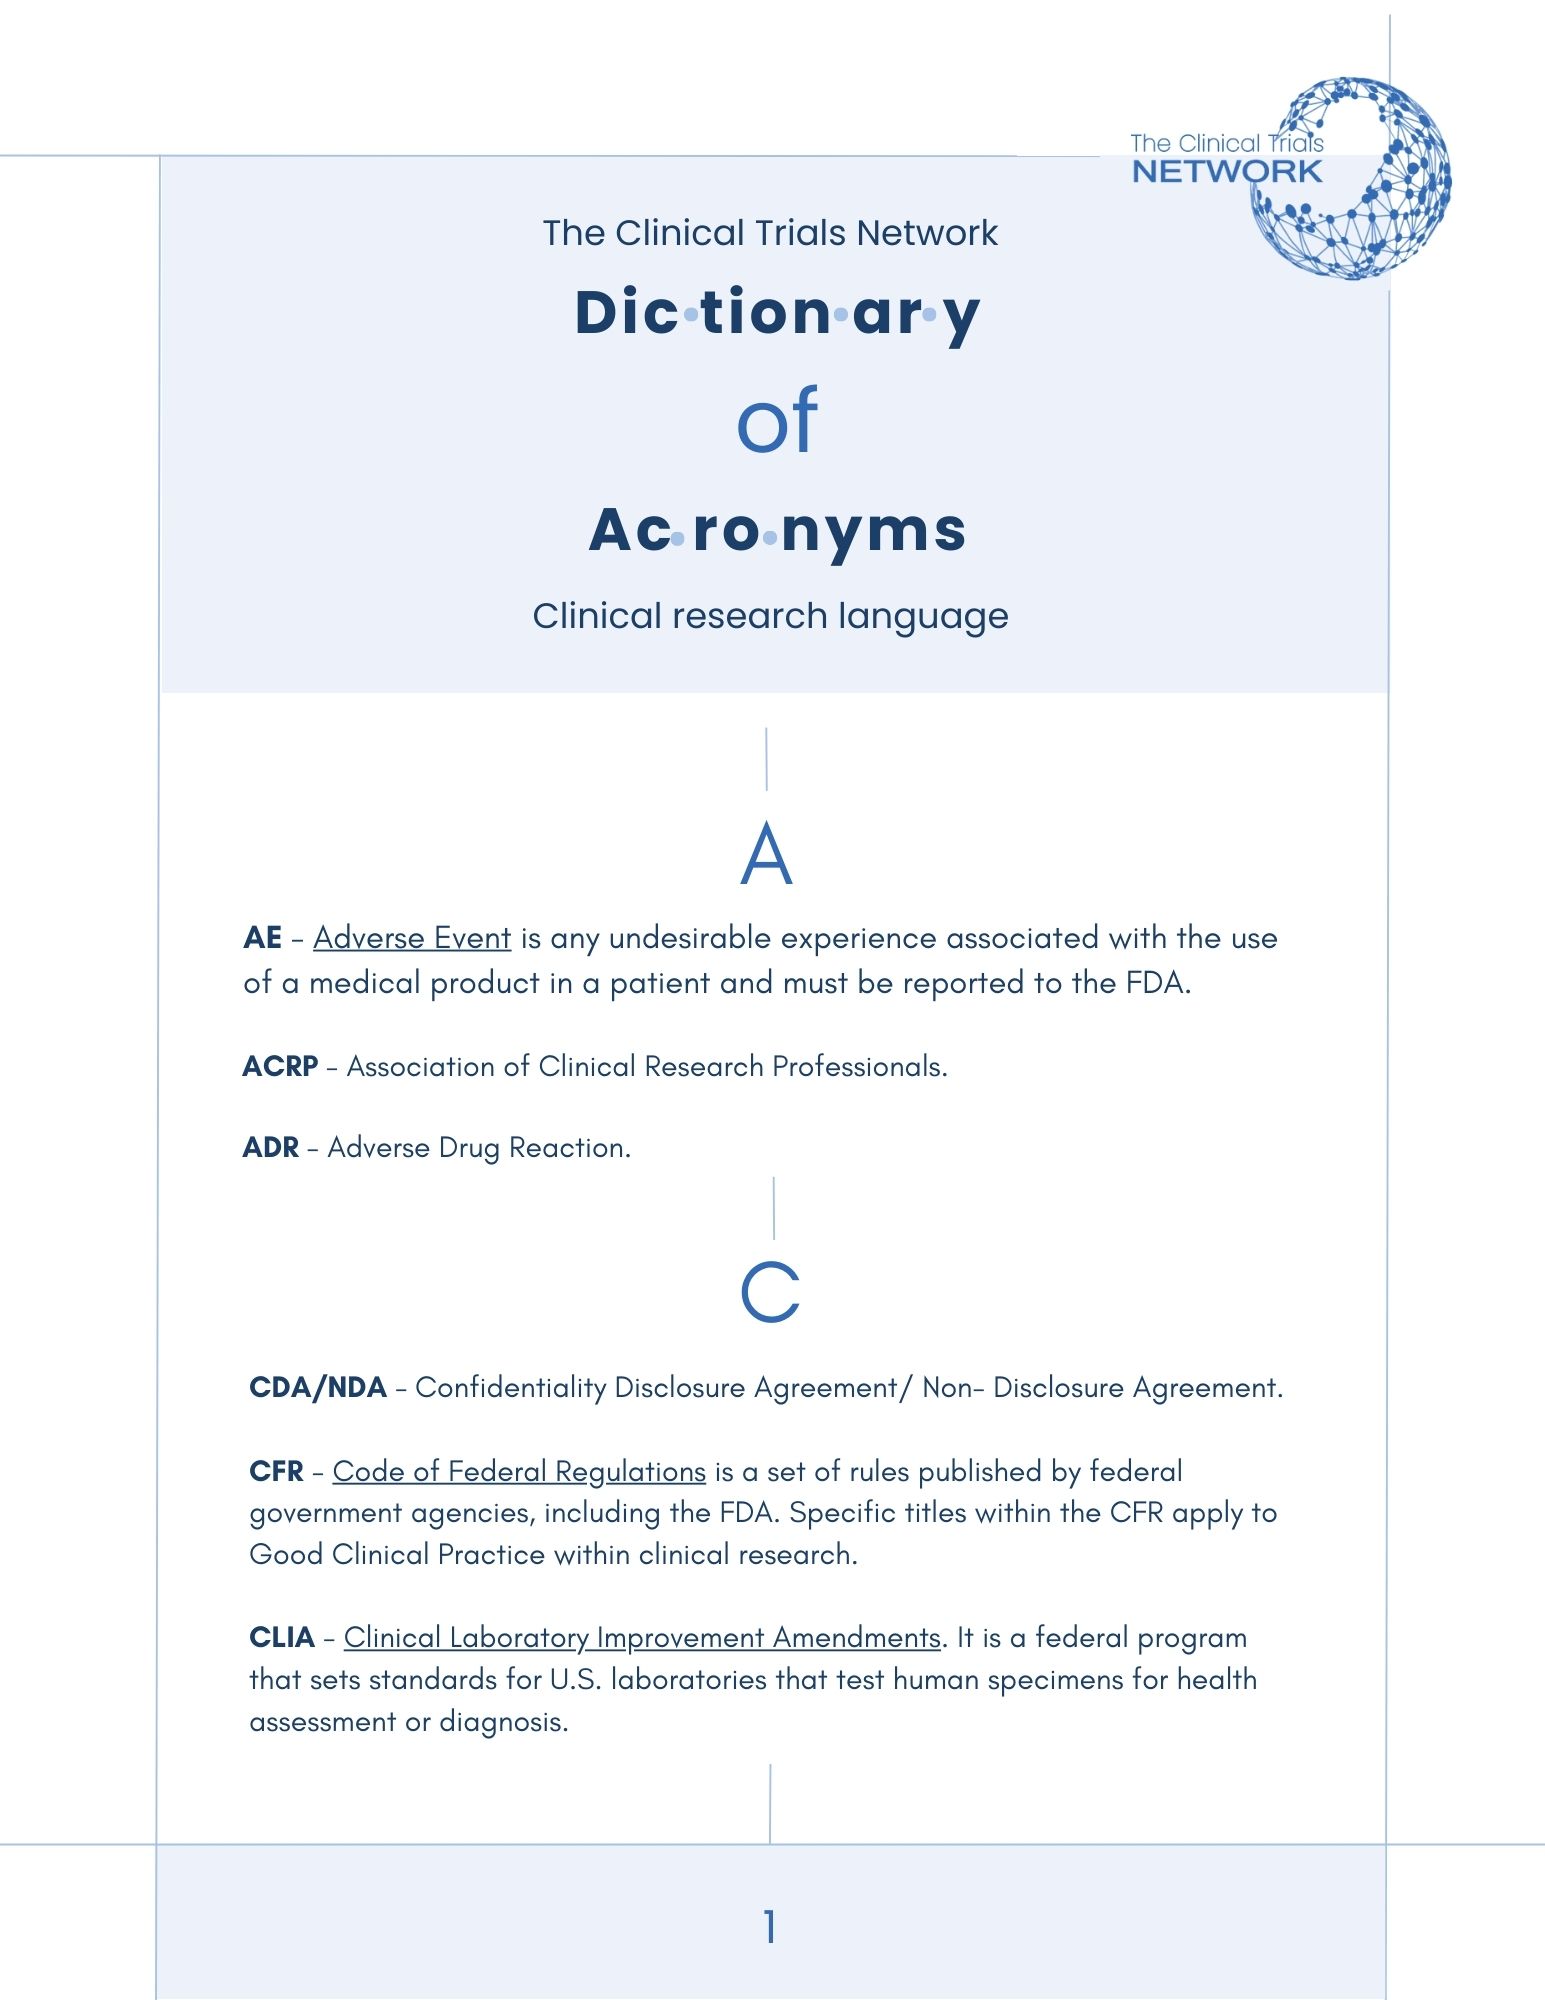 The Clinical Trials Network Dictionary of Acronyms A through C. Blue and white